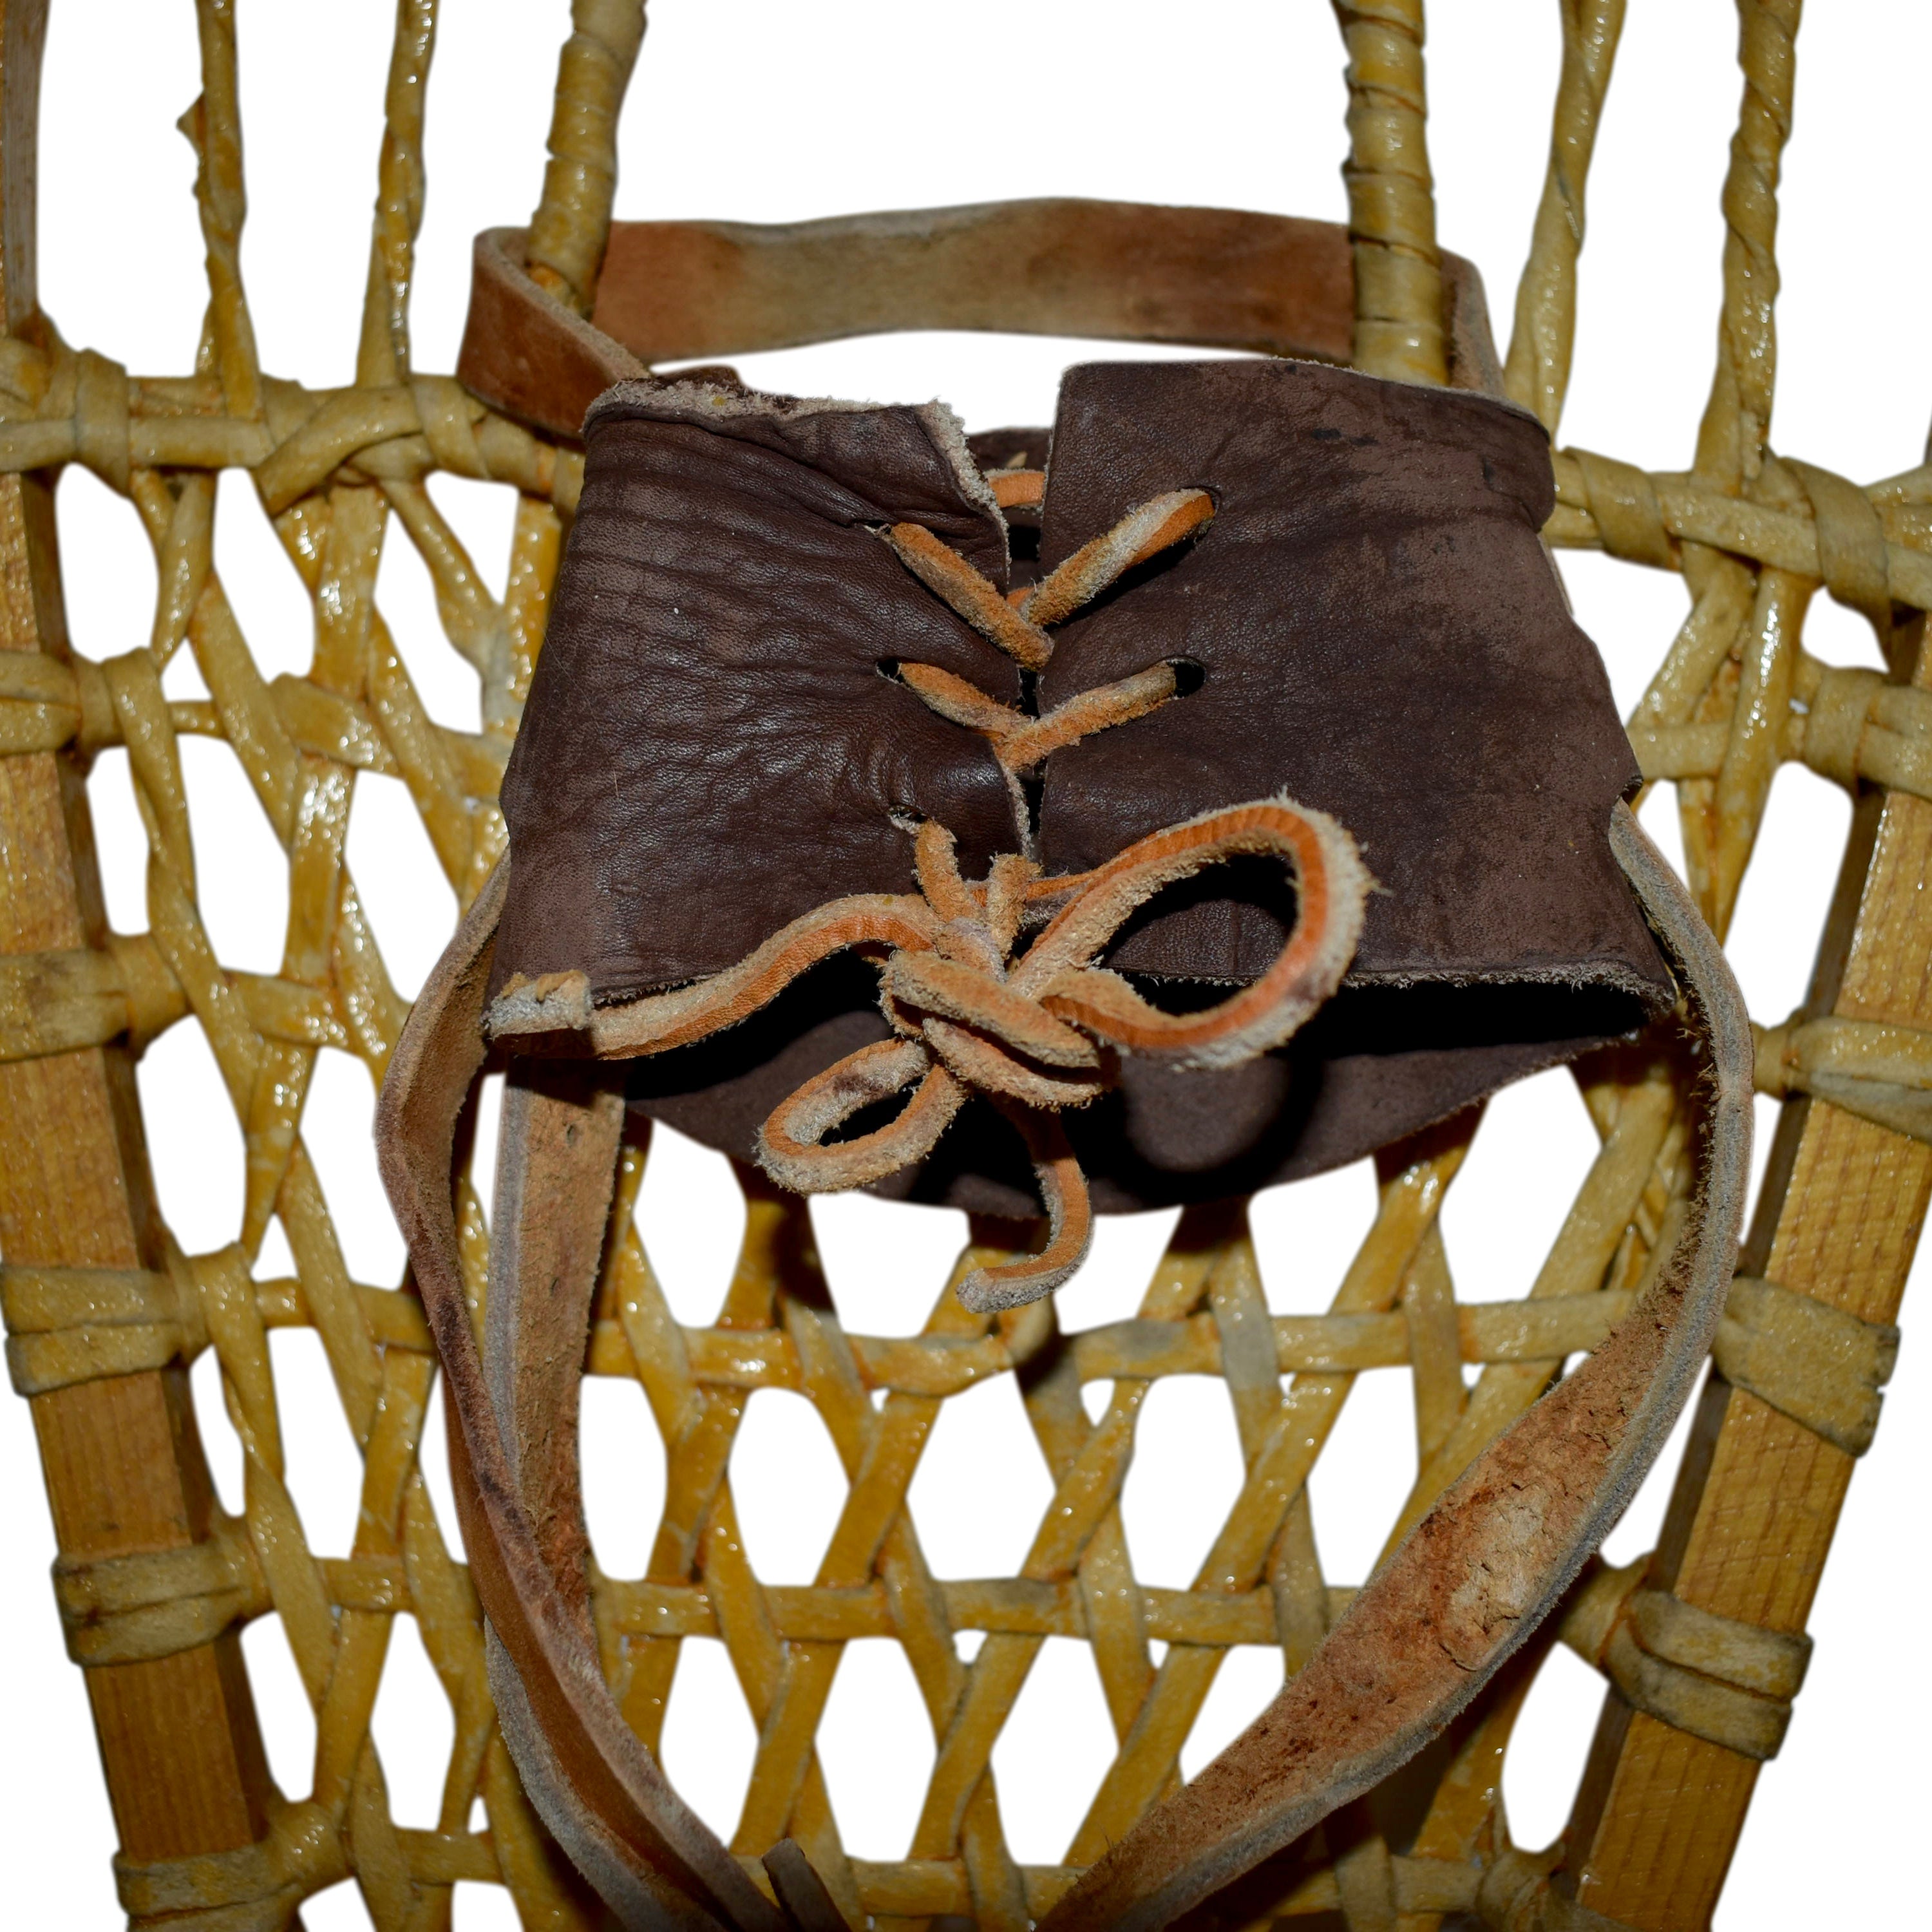 Canadian Huron Snowshoes with Leather Bindings